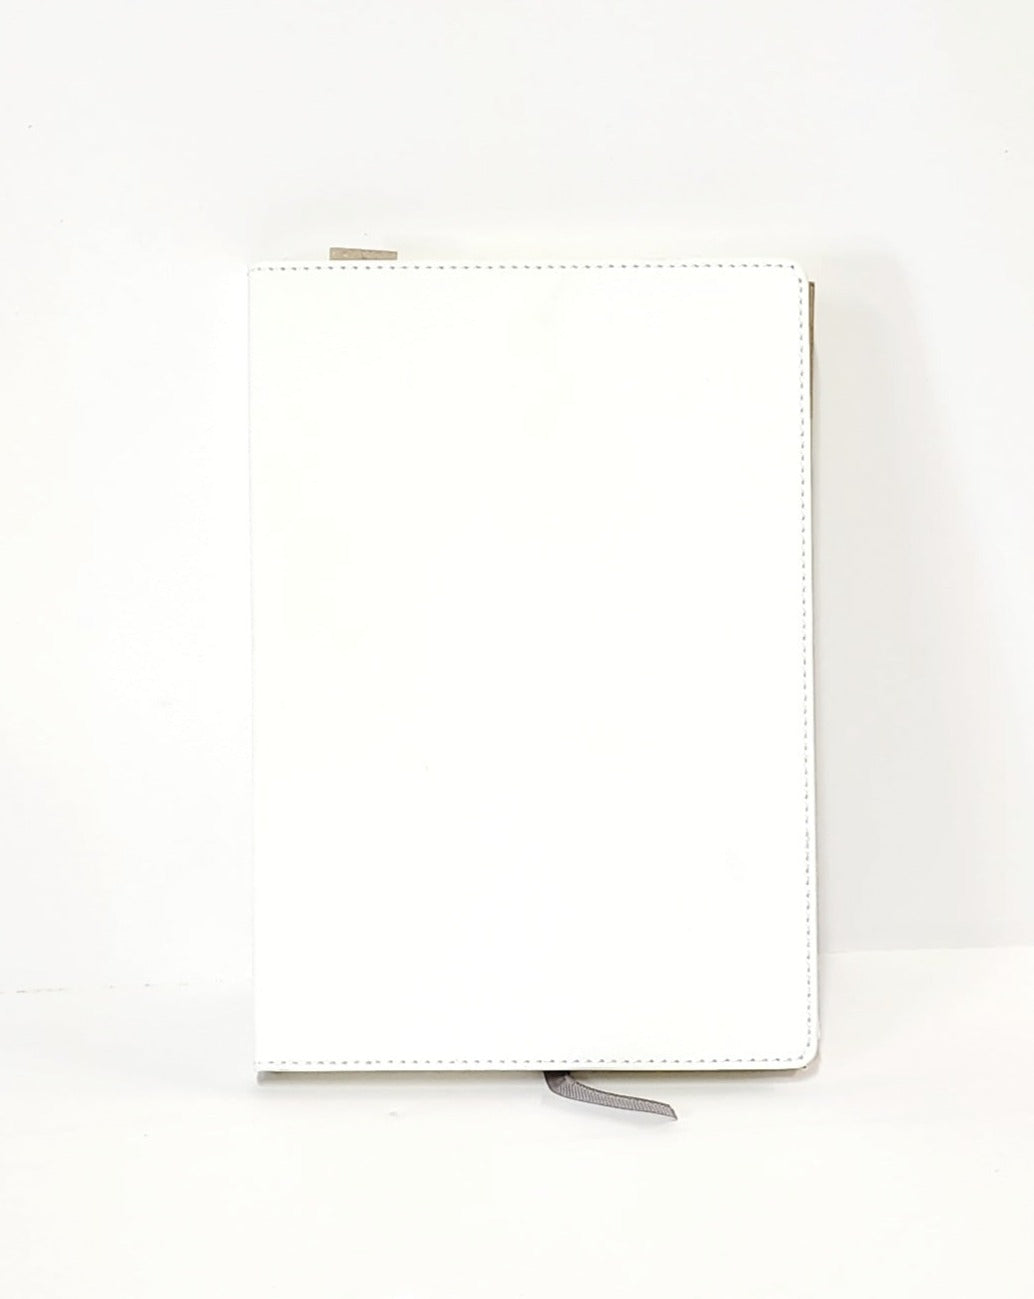 LEATHER (faux) SUBLIMATION BLANK JOURNAL 8'' X 6'' (SIZE A5)